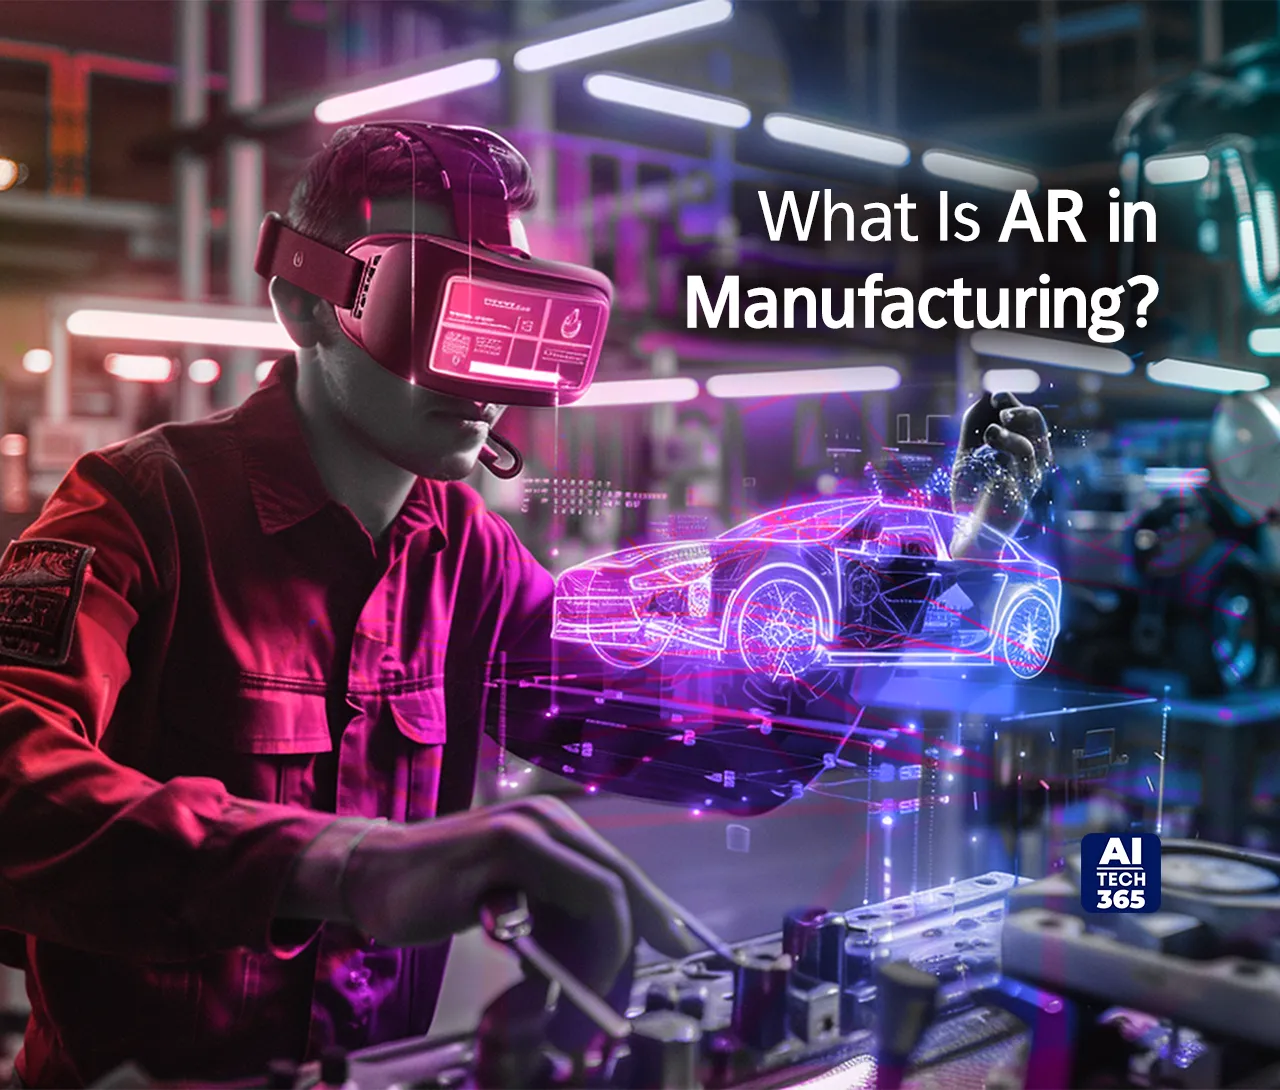 AR in Manufacturing